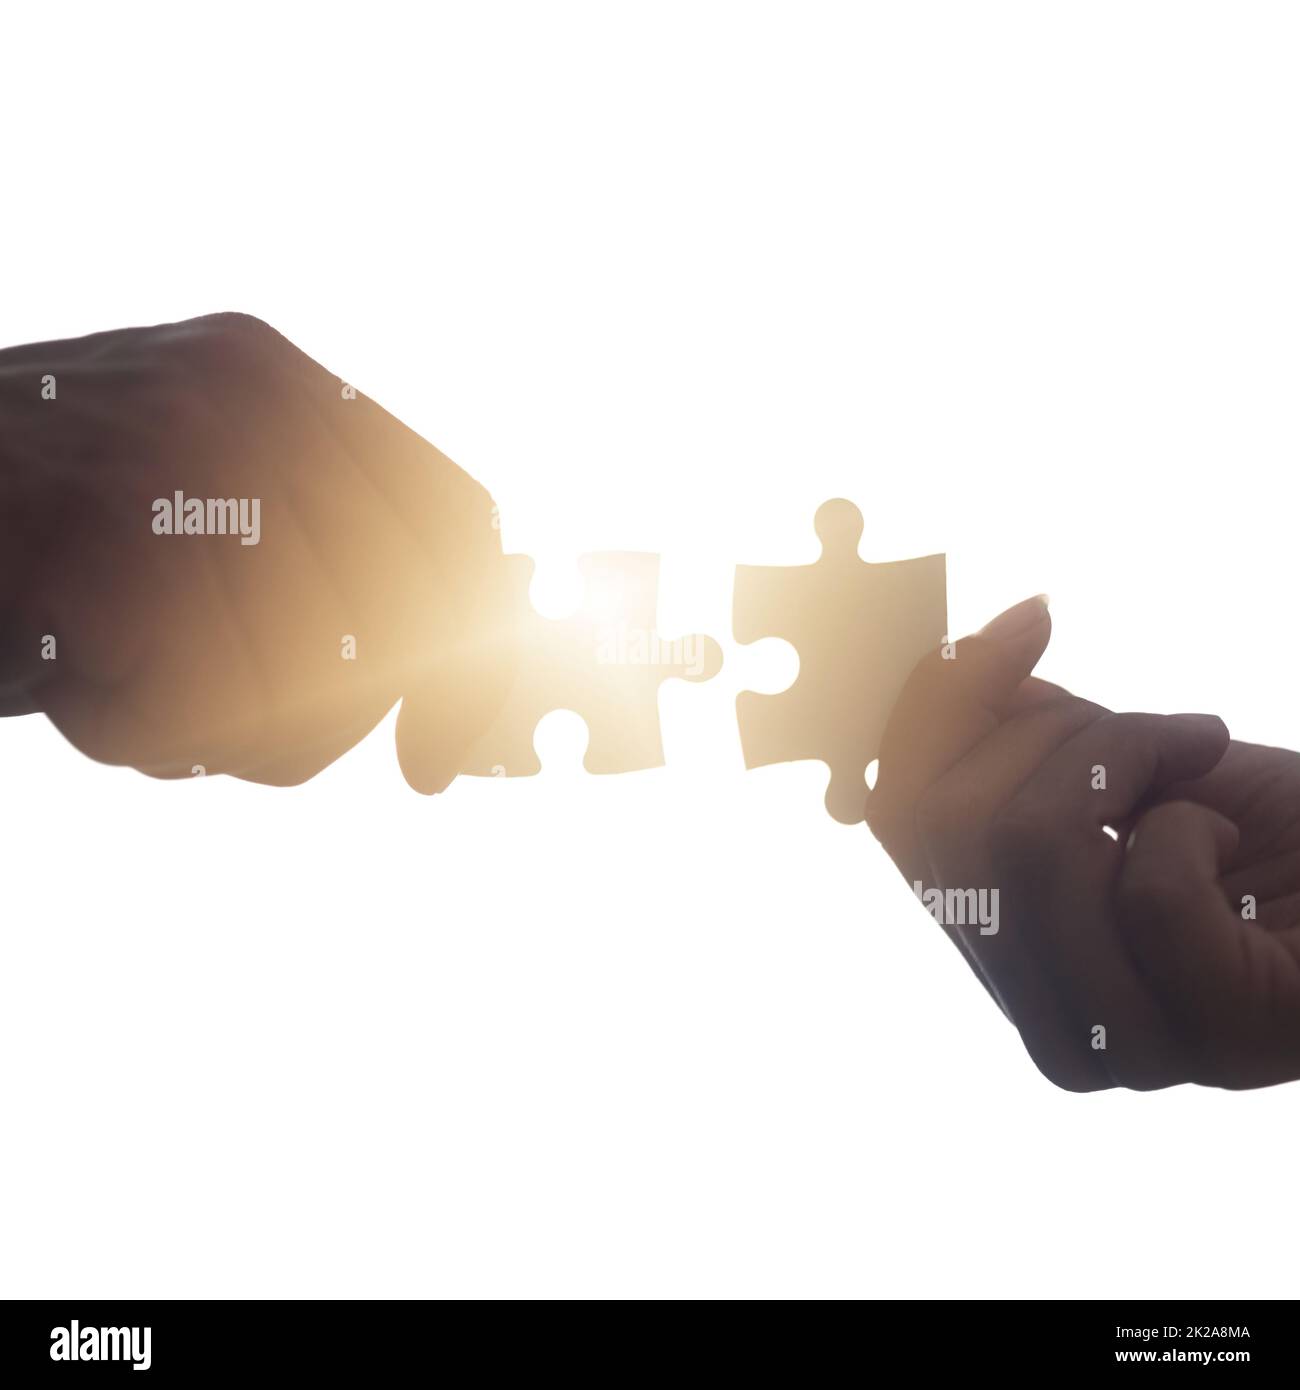 Problems can be solved quicker together. Closeup shot of two unrecognisable people putting two puzzle pieces together. Stock Photo